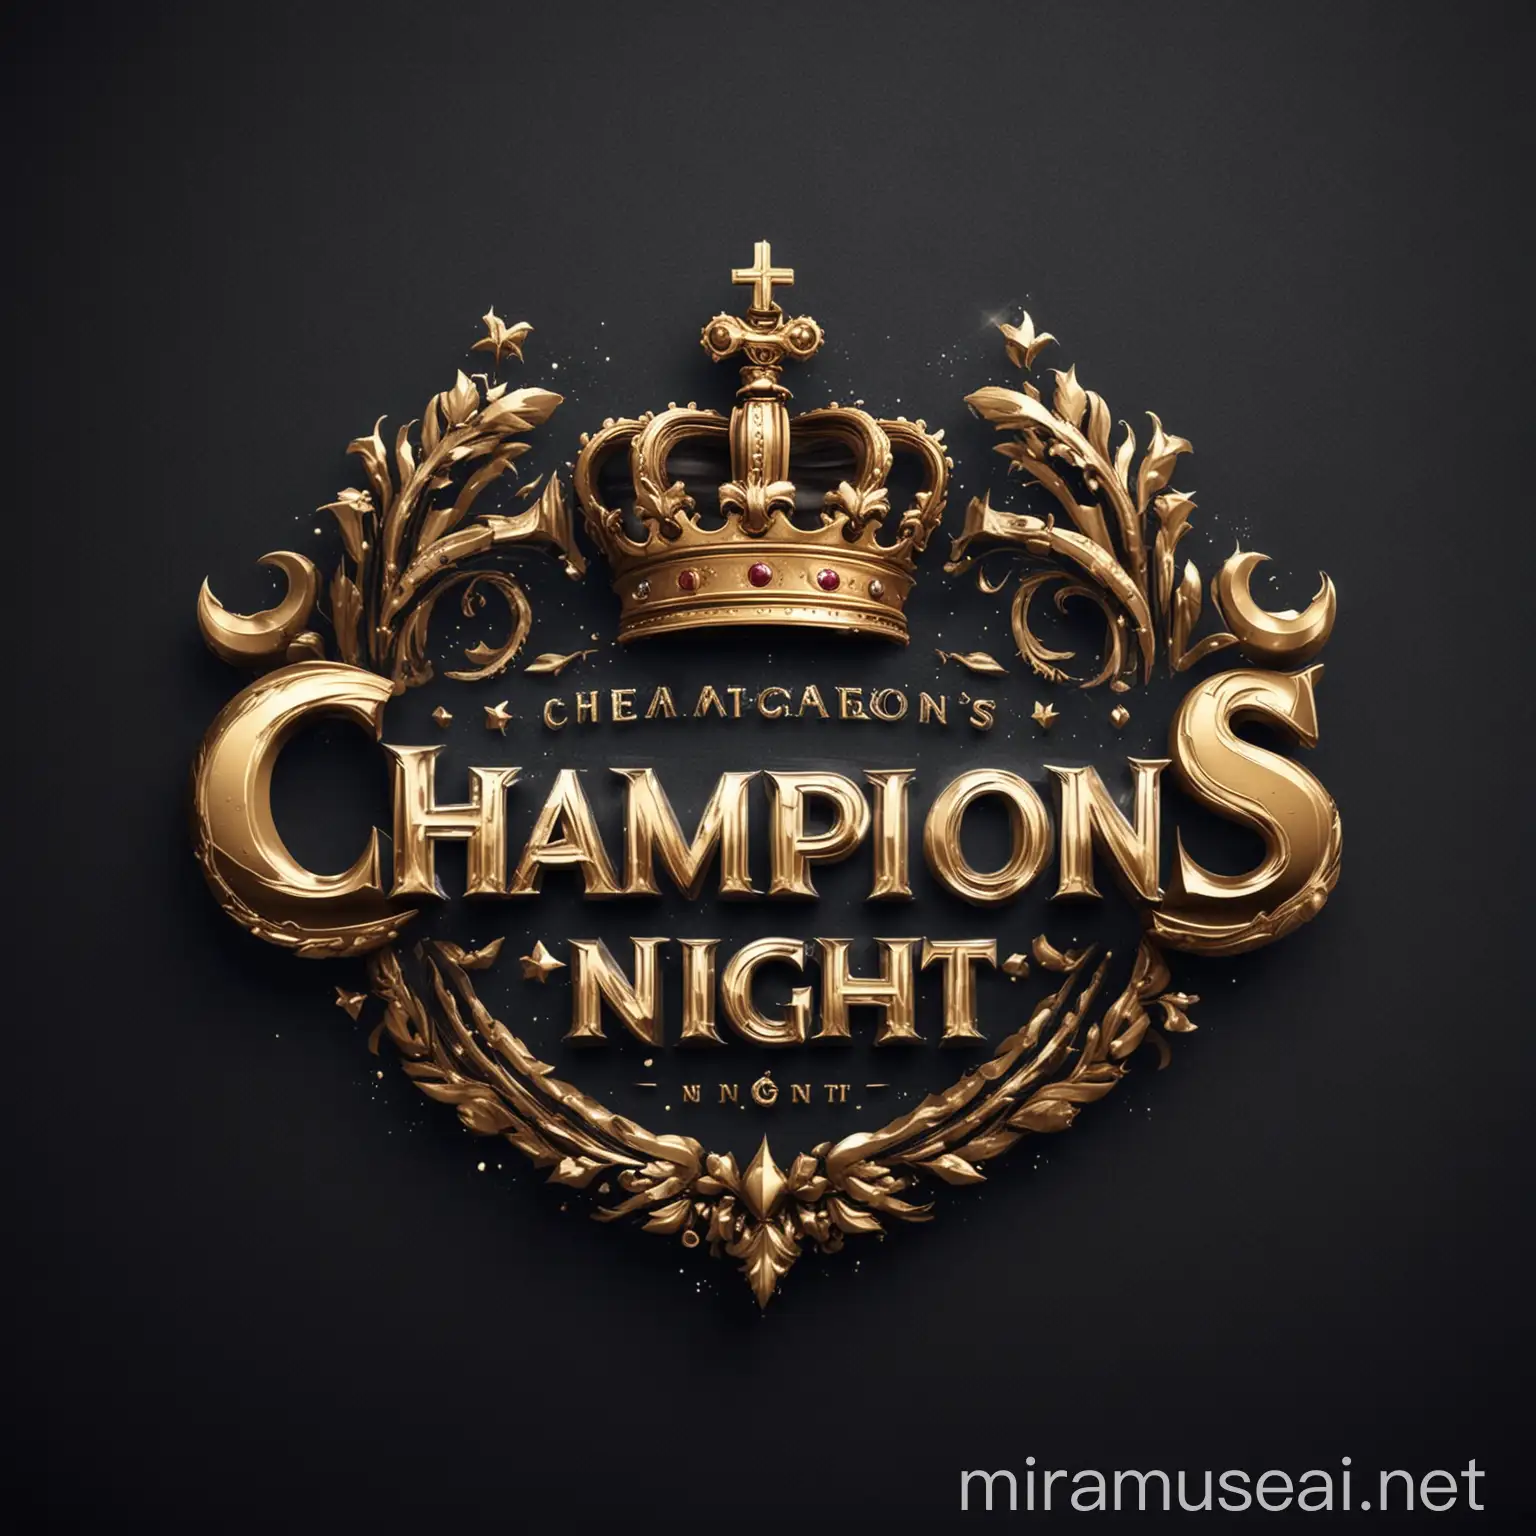 Elegant Logo Design for Champions Night Event Representing Class and Royalty